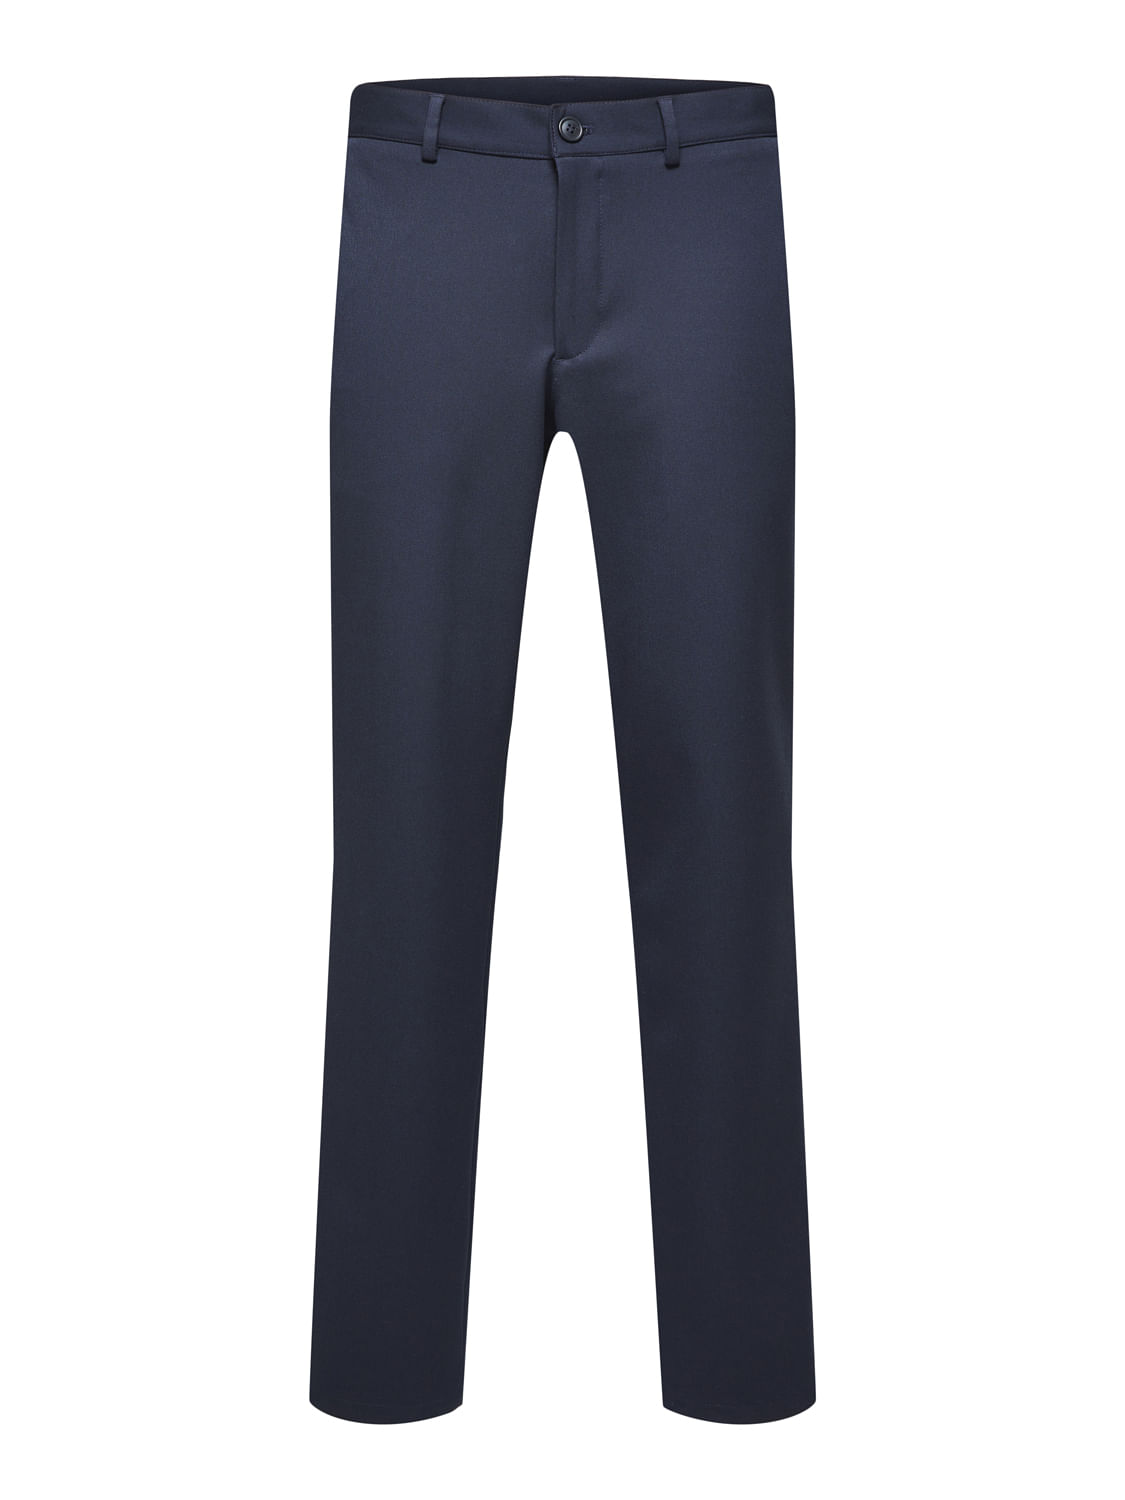 Victorious Men's Basic Casual Slim Fit Stretch Chino Pants DL1250 - NAVY -  30/32 - Walmart.com